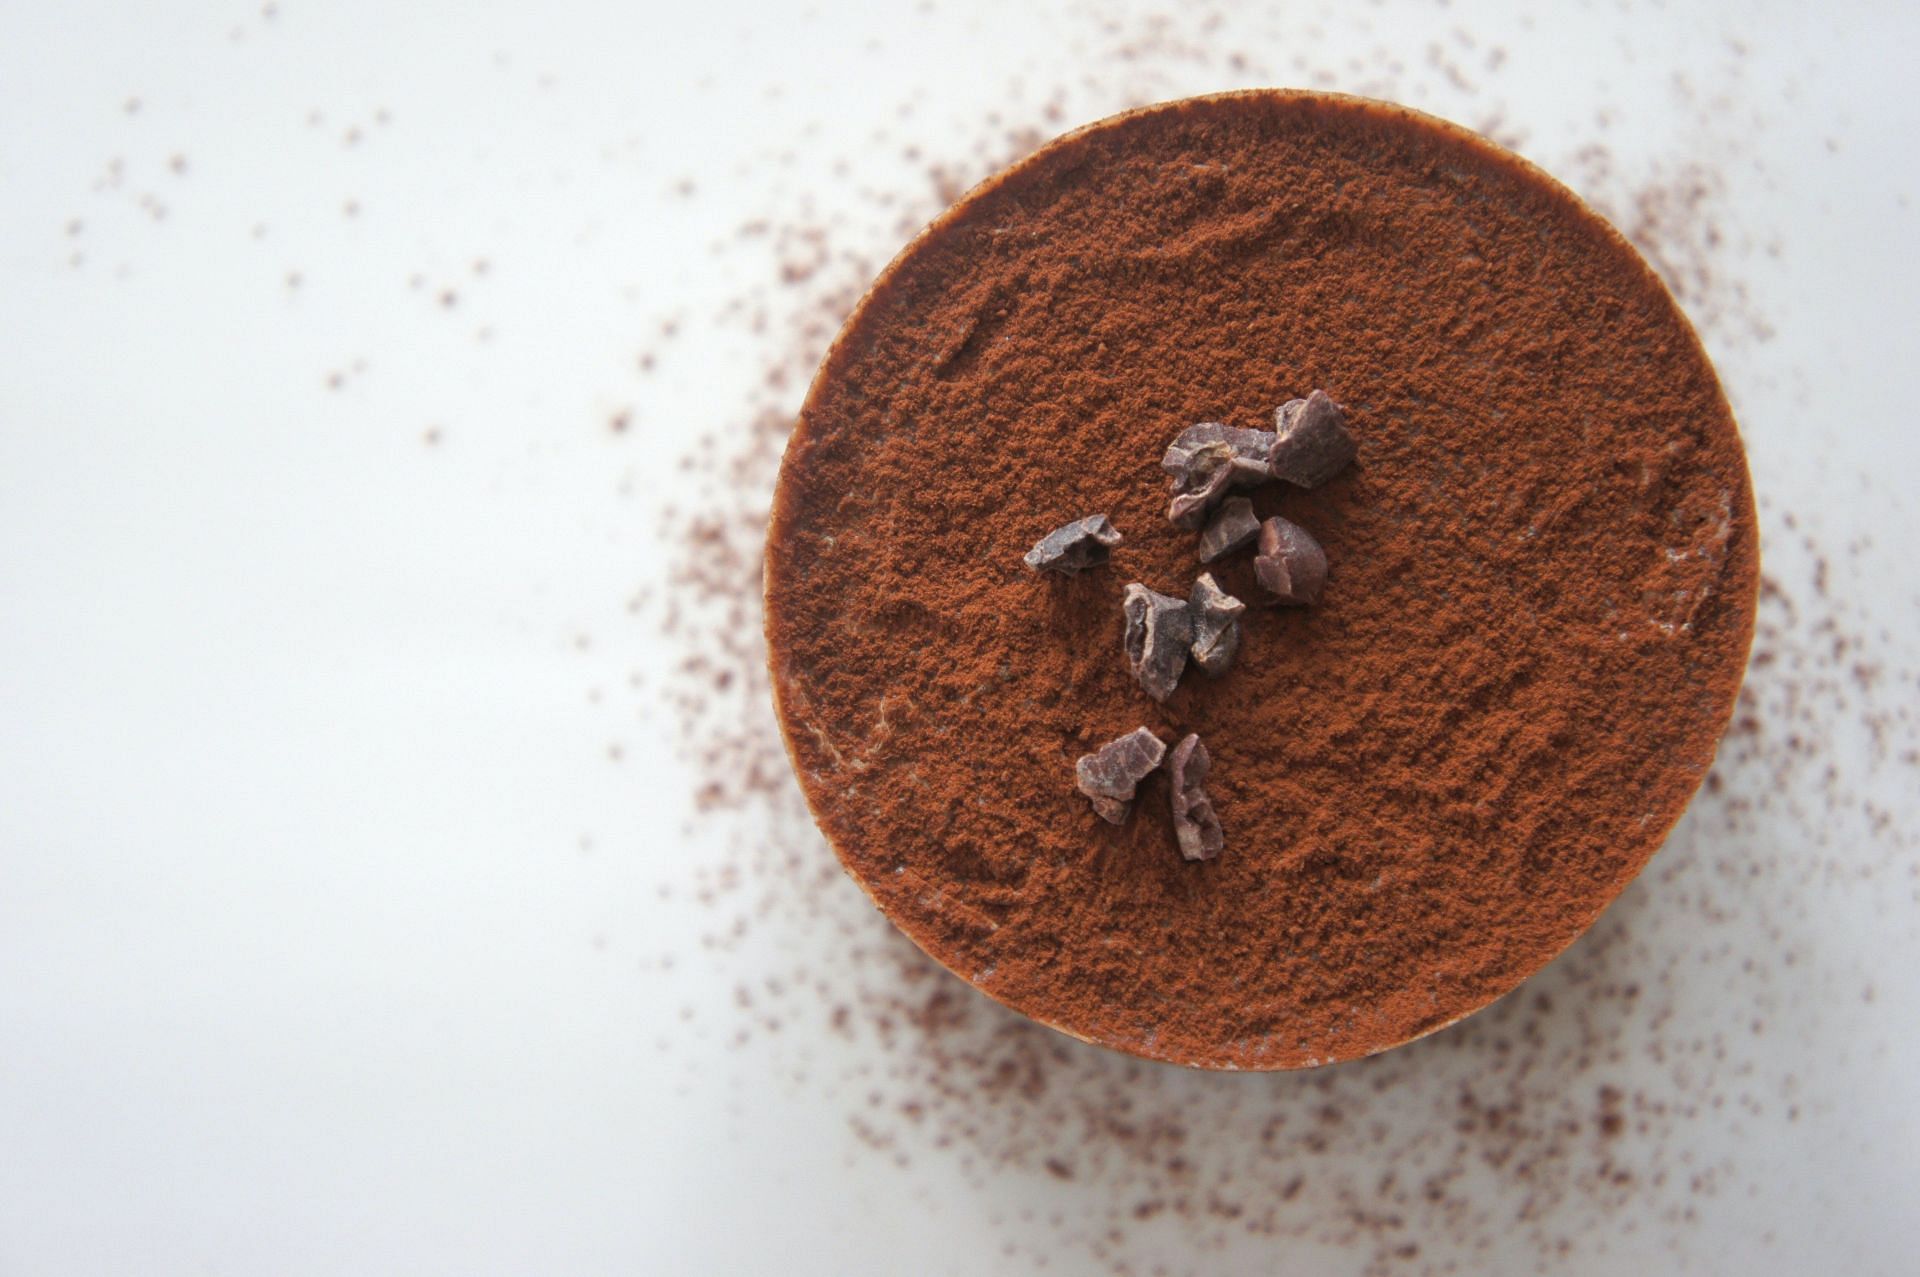 DIY Protein Powder: Make Your Own Nutritious Blend at Home (Image via Pexels)